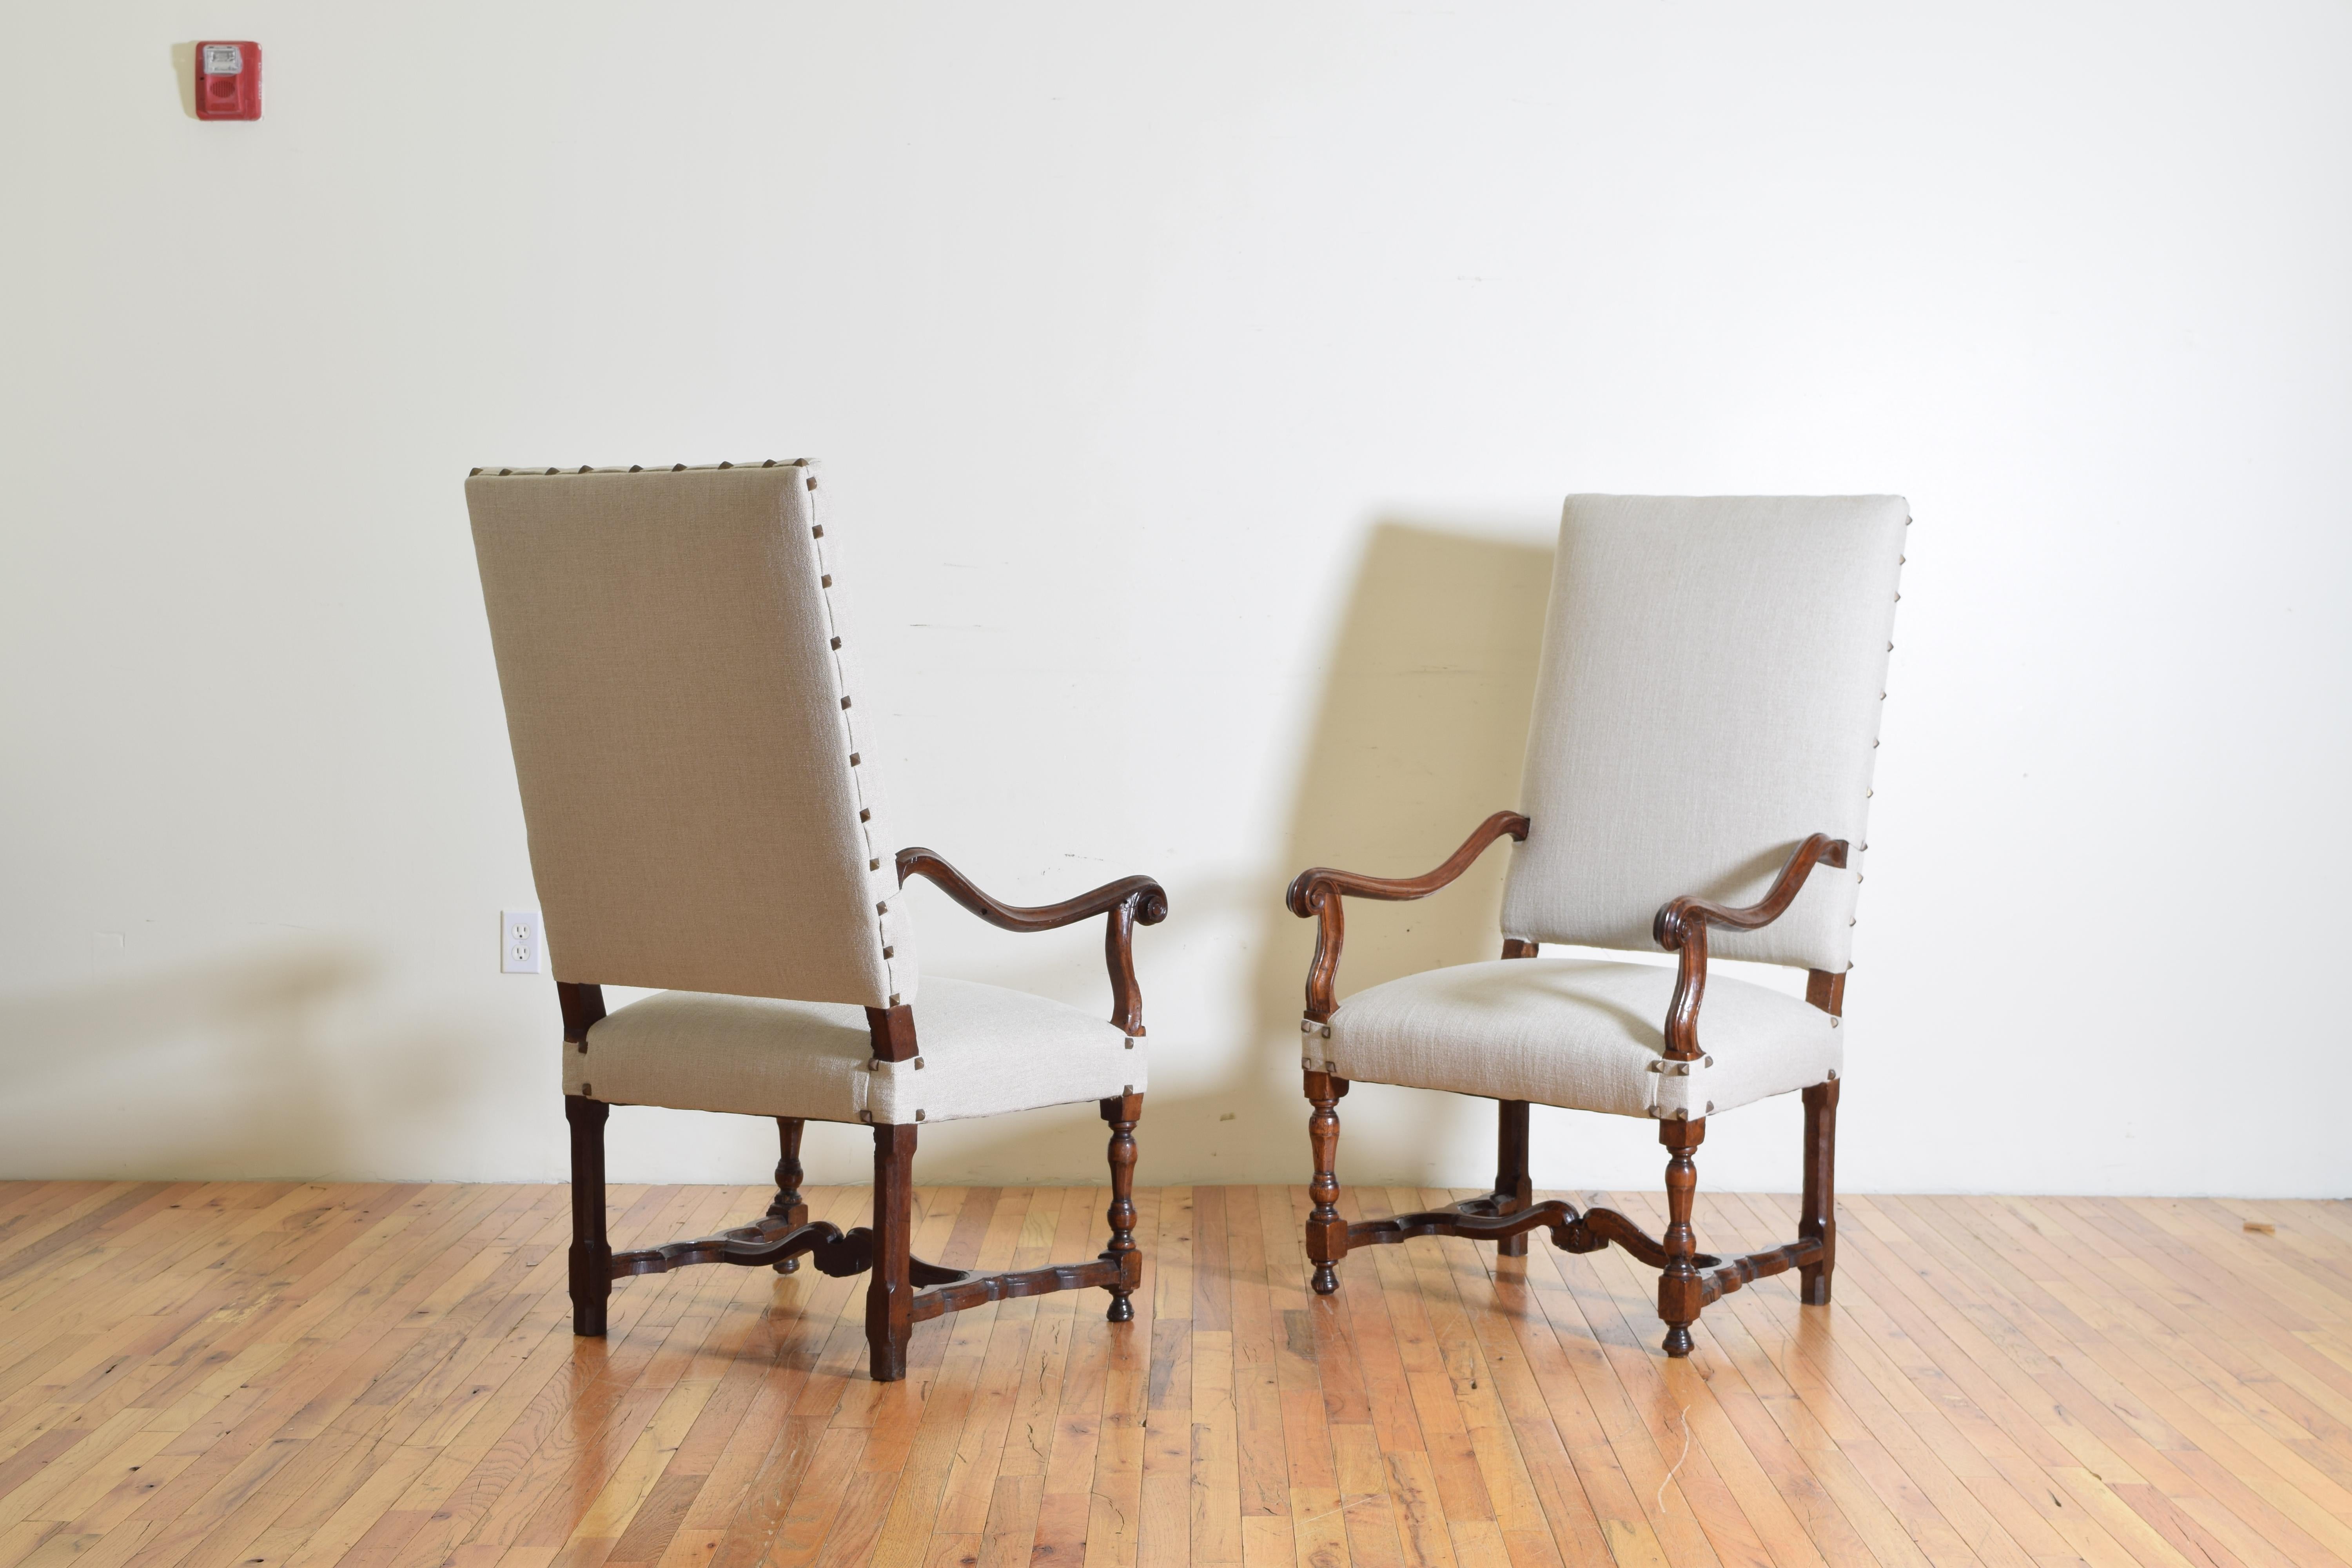 Newly upholstered in a beige linen and incorporating a melange of elements of 18th century periods these chairs have curved arms and arm supports, tight seats, and are raised on turned legs joined by curved stretchers.